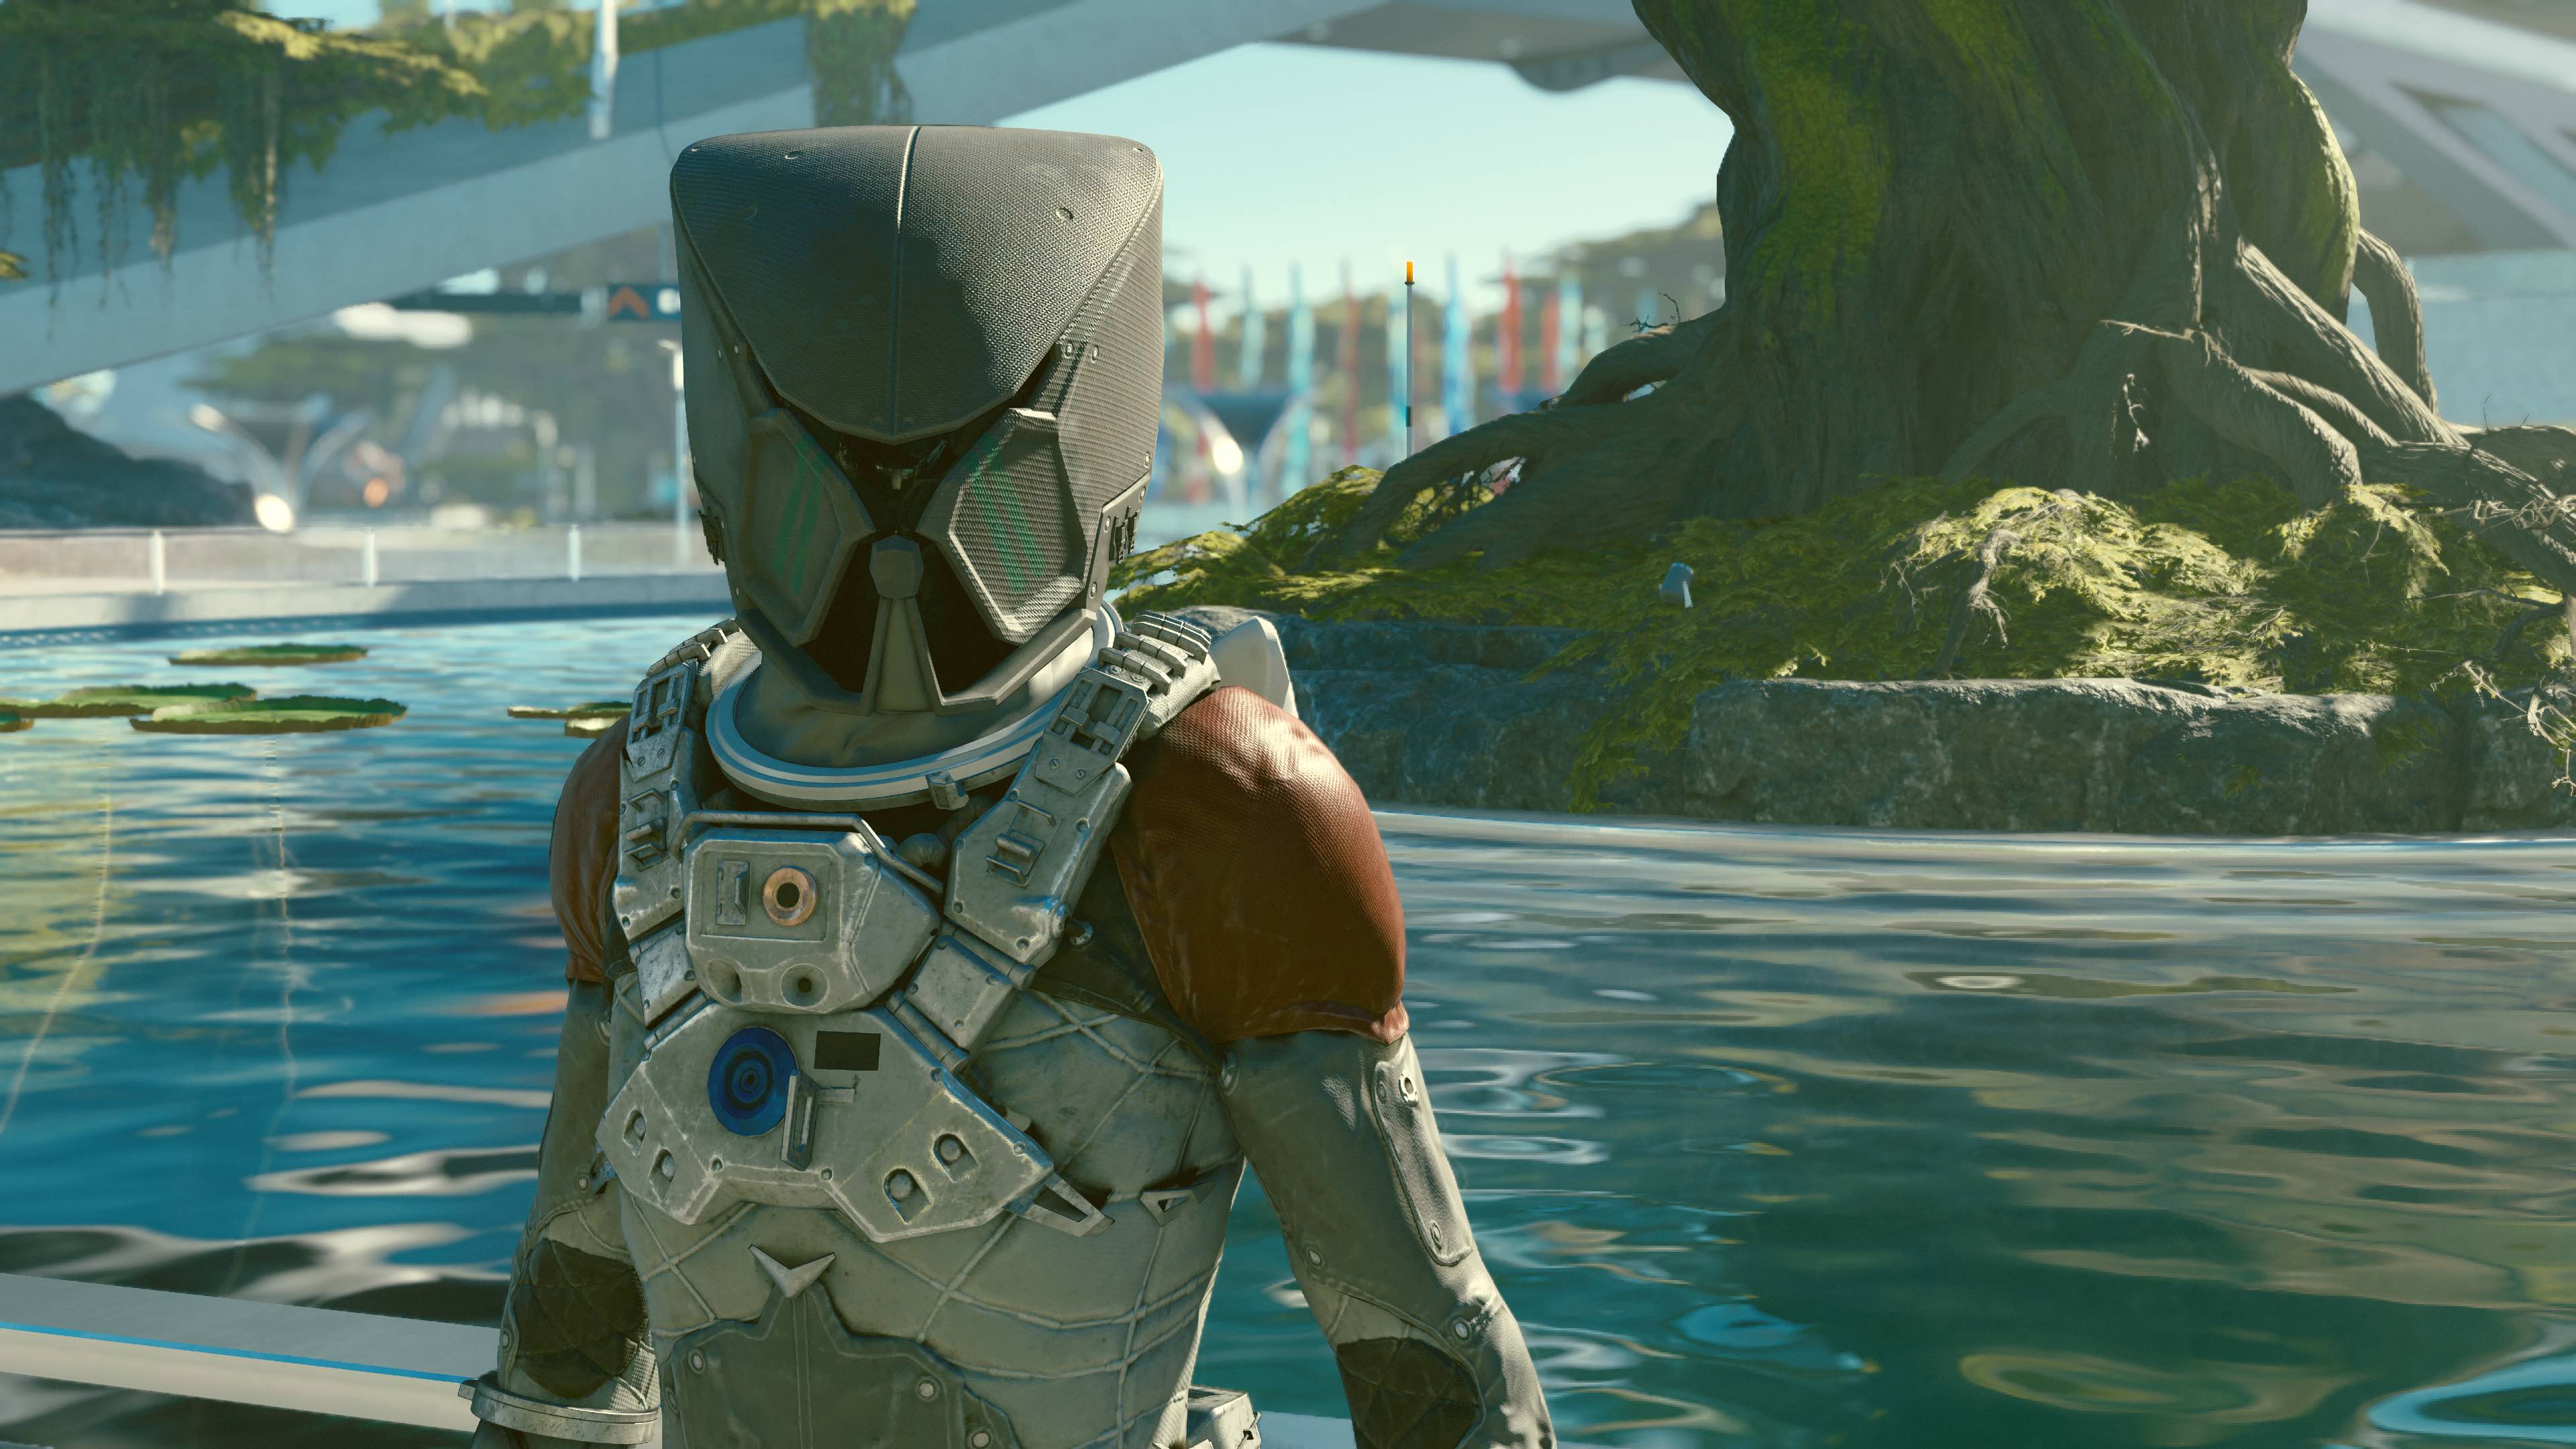 Image: A Sarah Morgan clone wearing the Mantis helmet stands near a pond in New Atlantis in Starfield.